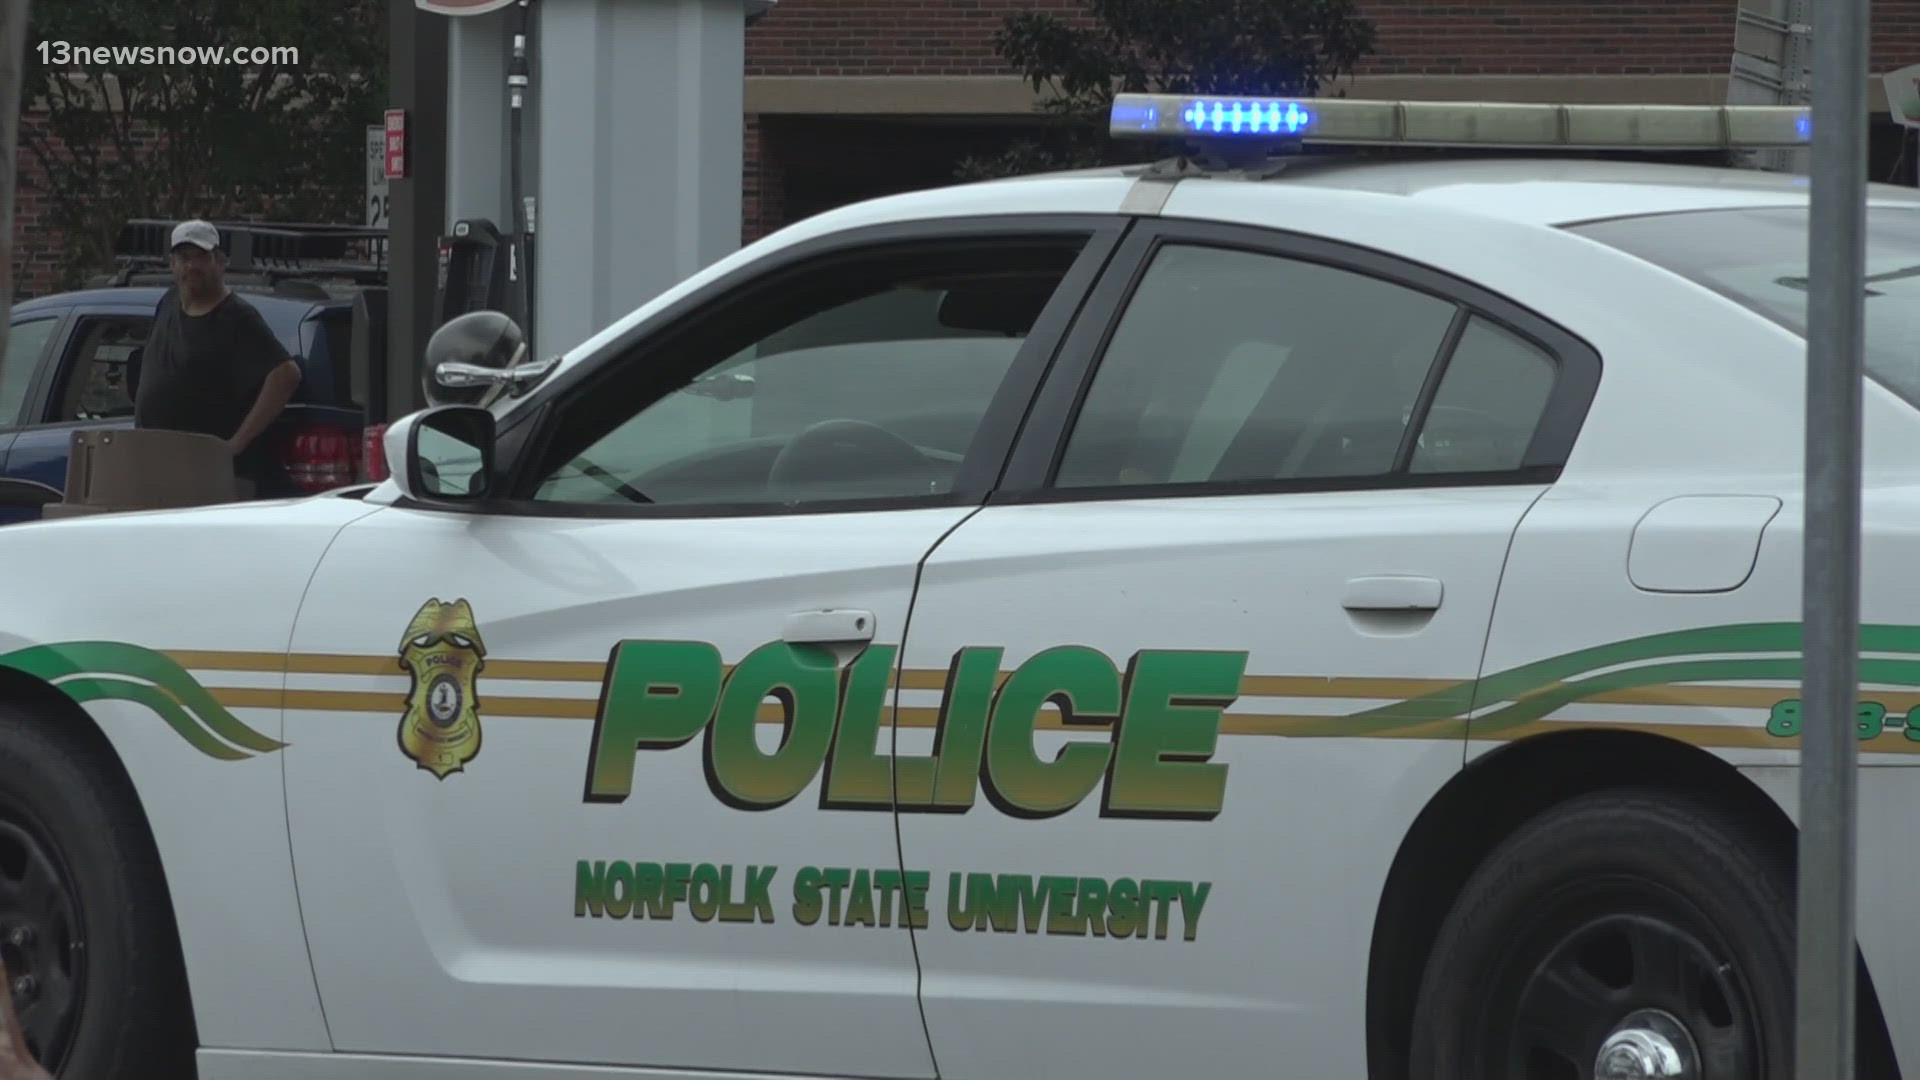 New security measures are in the works at Norfolk State University less than three weeks after someone shot and killed junior Jahari George.